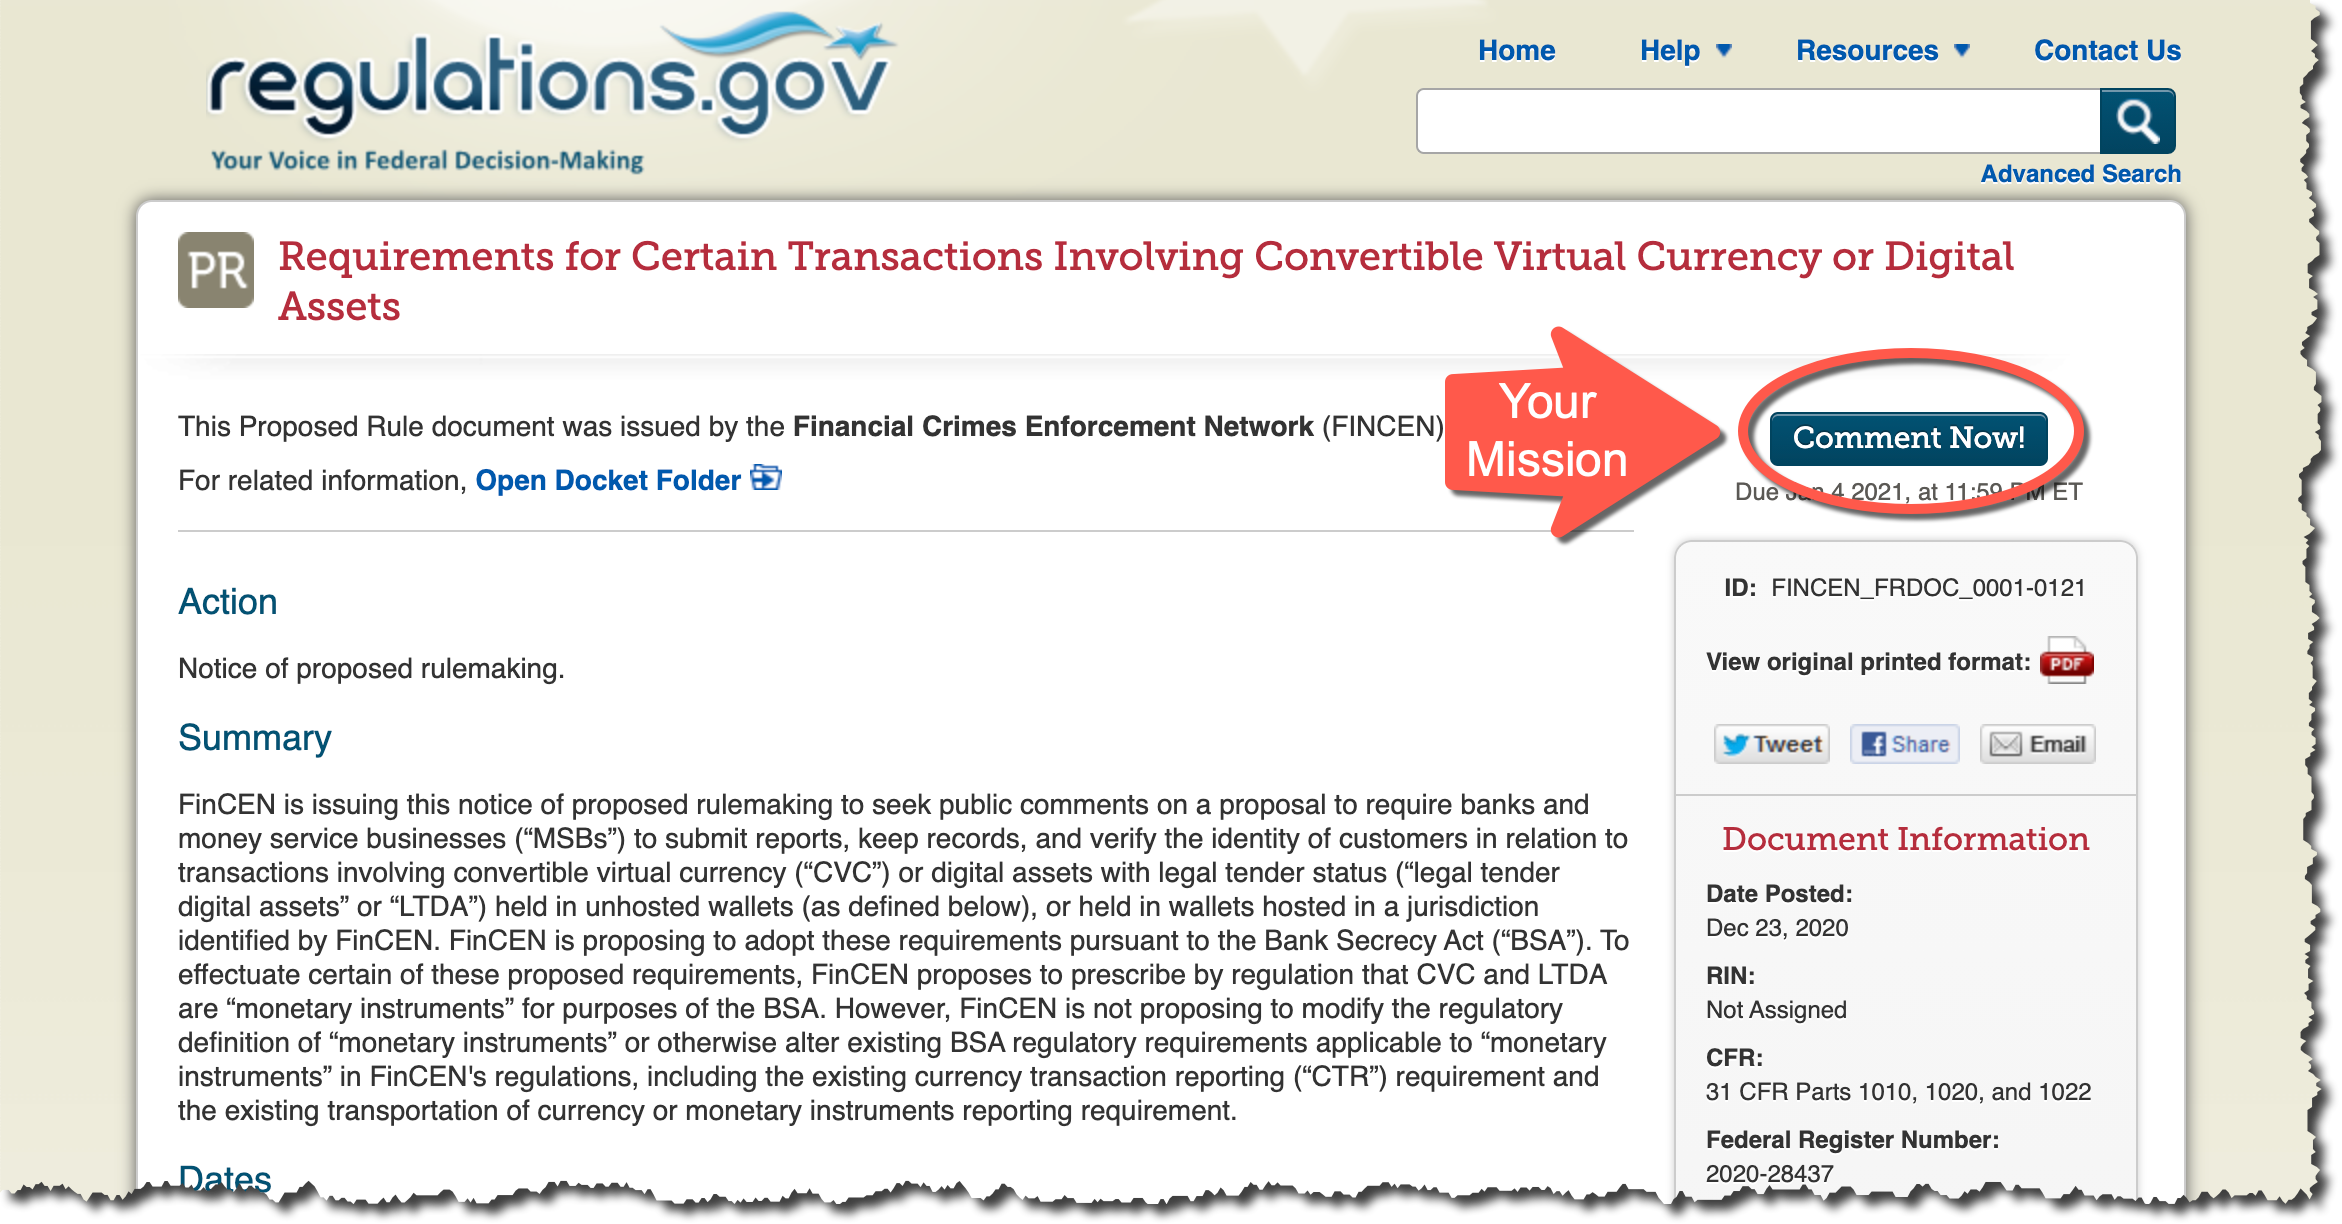 fincen page comment now.png